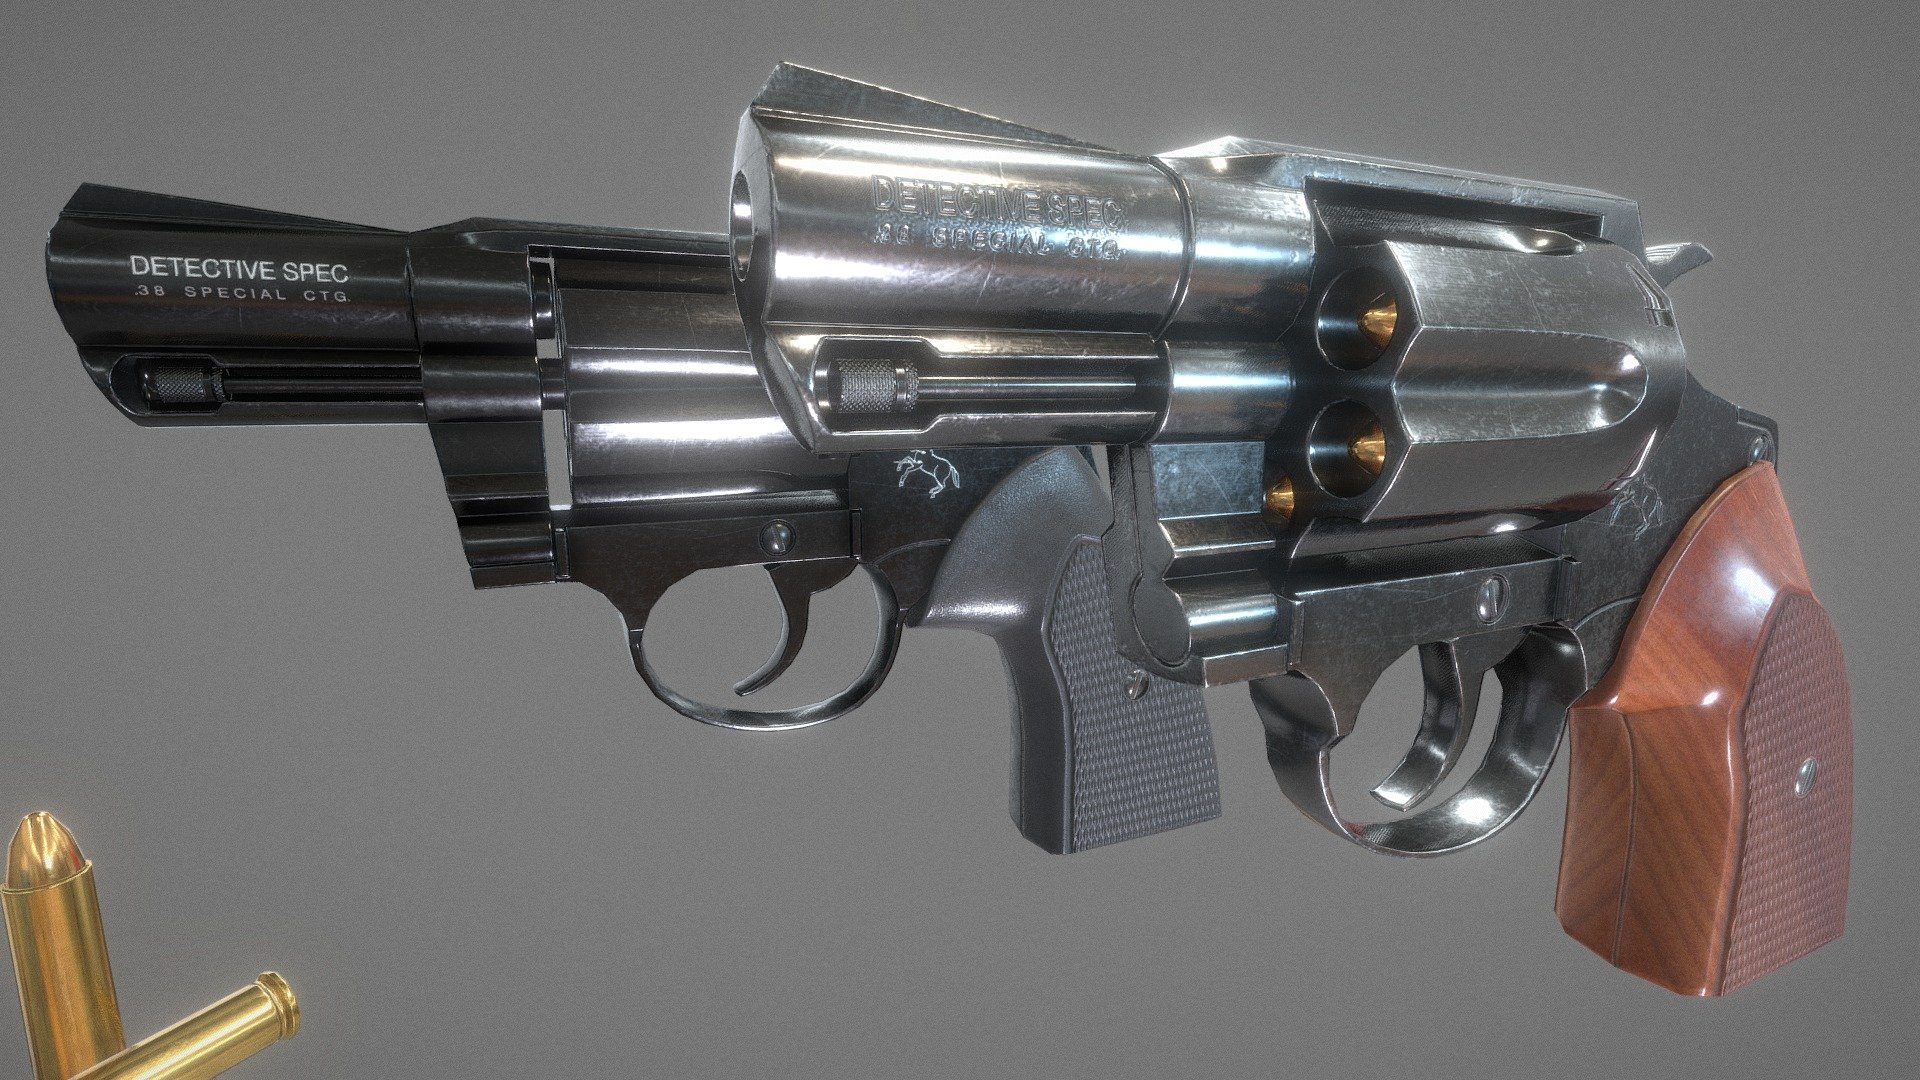 Hello, this is my model of Colt Detective Special, noir style revolver. In arcive you find two versions (black and shiny). Gun is rigged (see video preview). Hope you like it 3d model